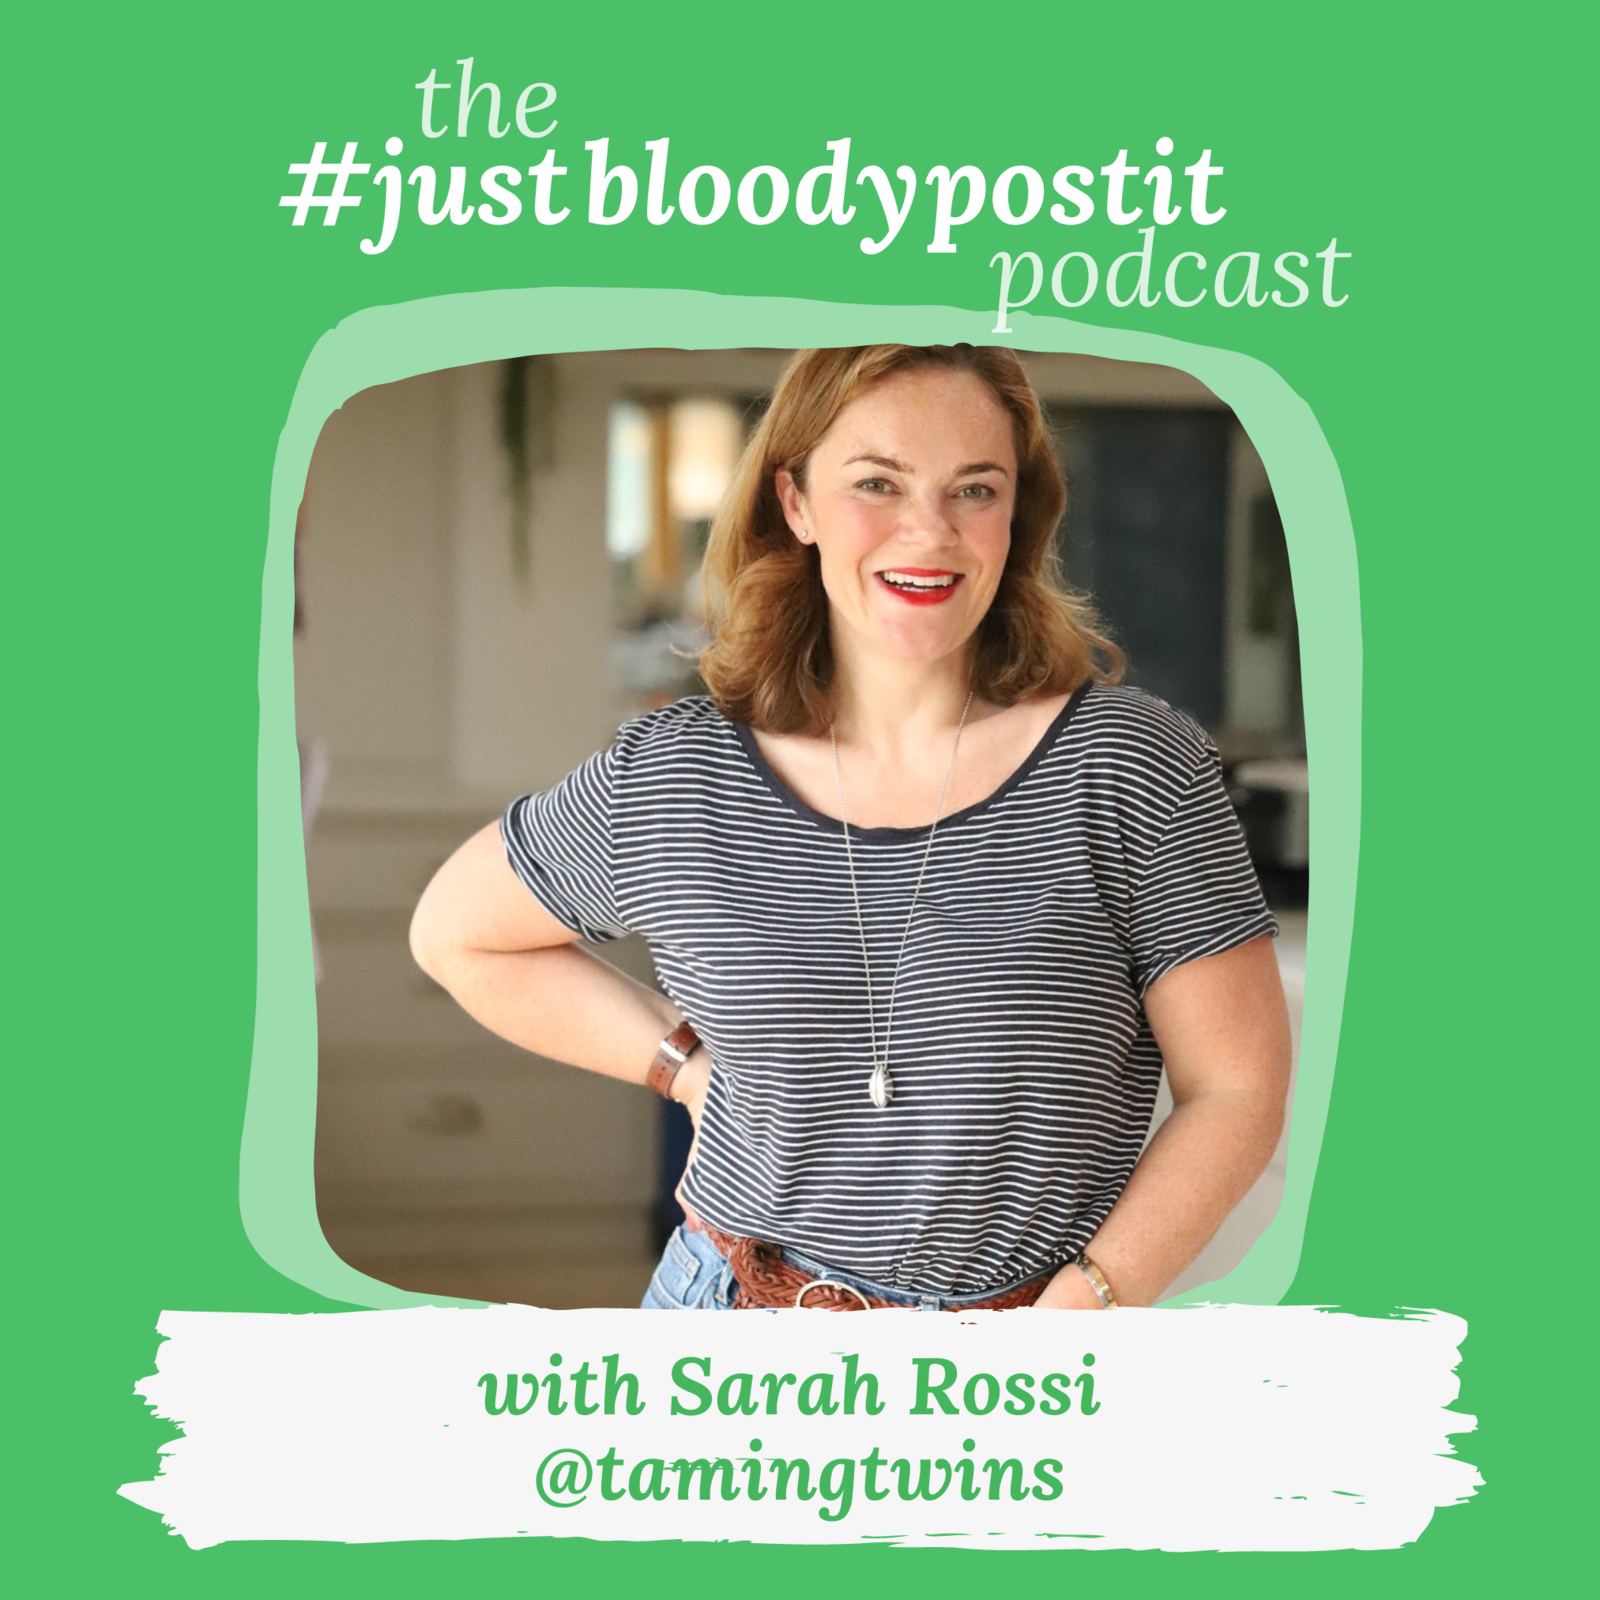 S6 Ep106: Ep #106 what next after massive follower growth with food blogger and writer Sarah Rossi @tamingtwins